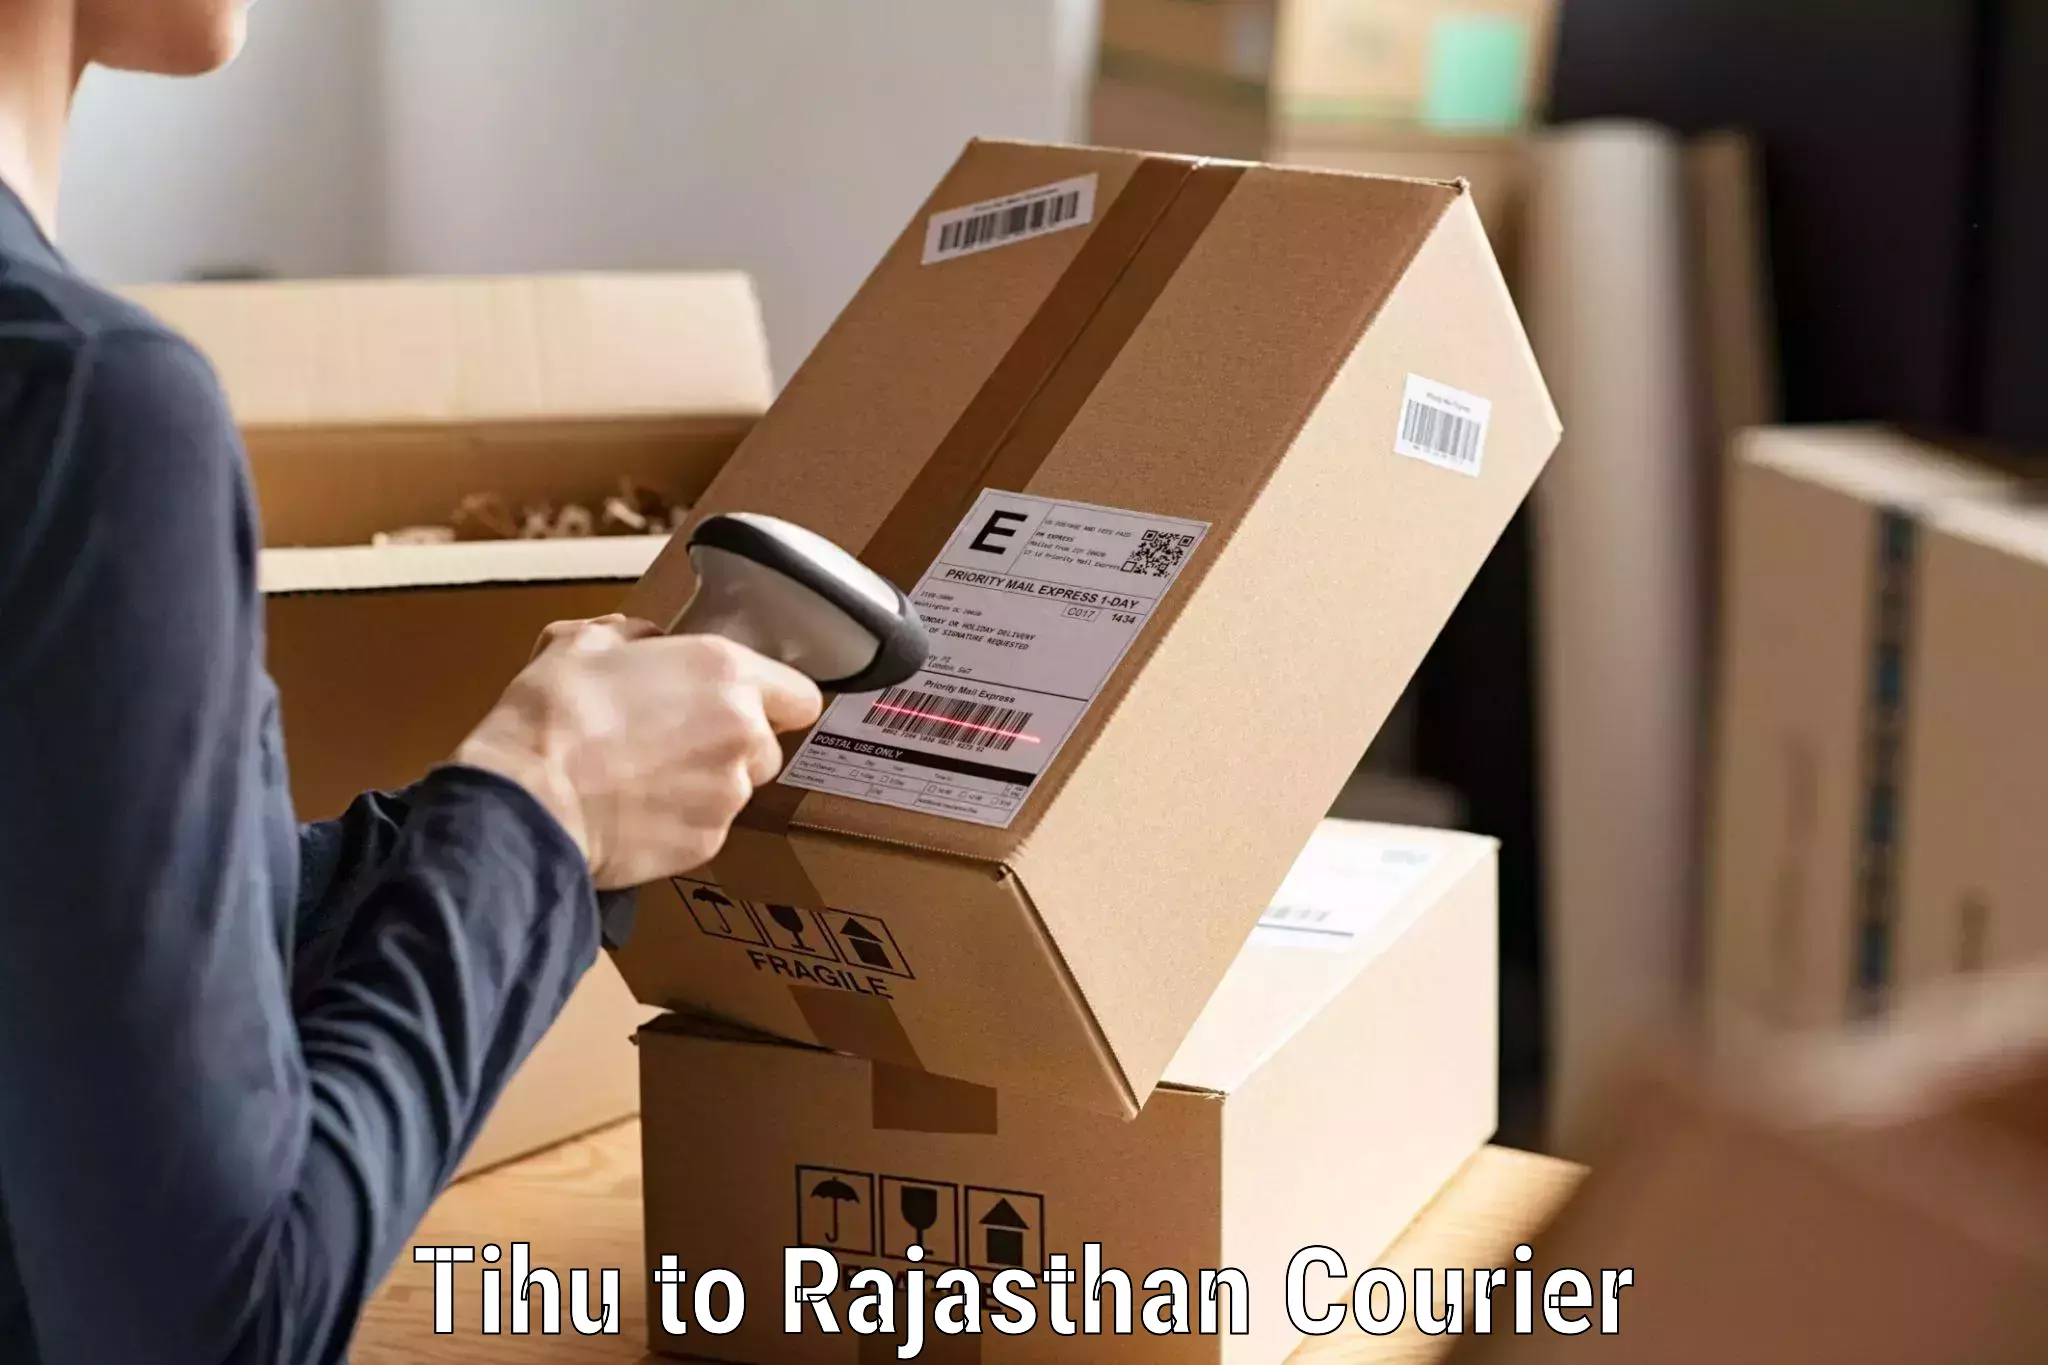 Return courier service Tihu to Rajasthan